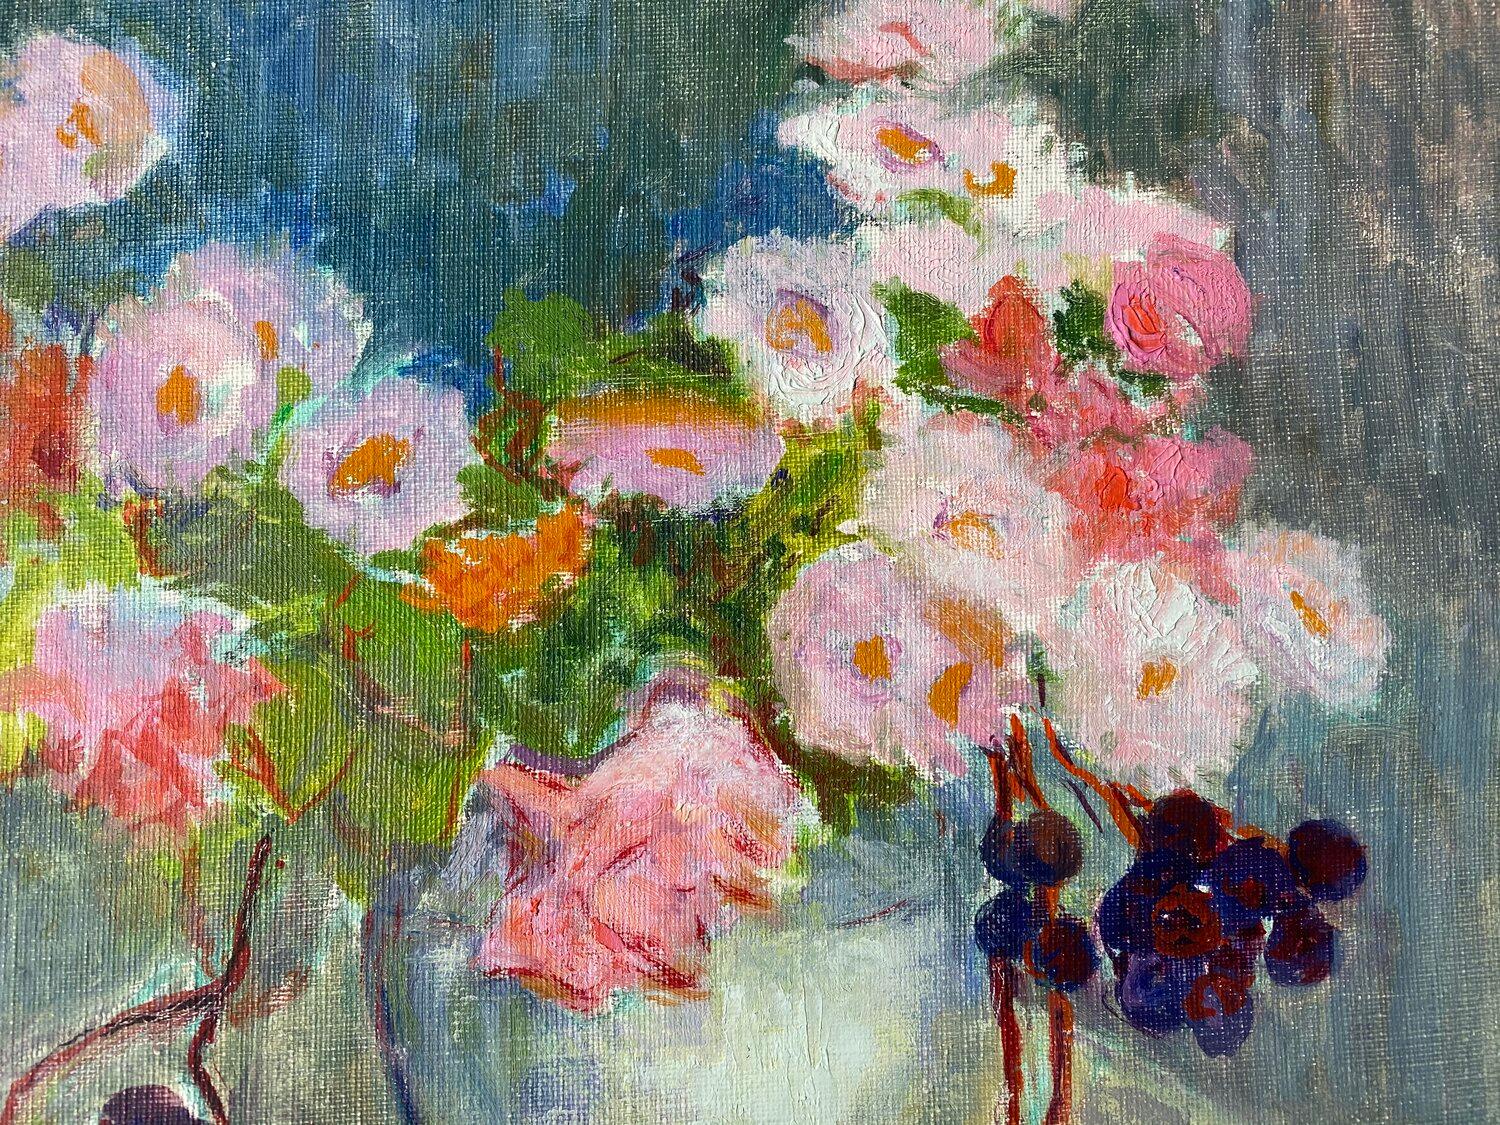 SIMONE RAMEL (FRENCH 1960'S) SIGNED OIL - FLOWERS IN VASE - PINK SHADES - Impressionist Painting by Simone Ramel